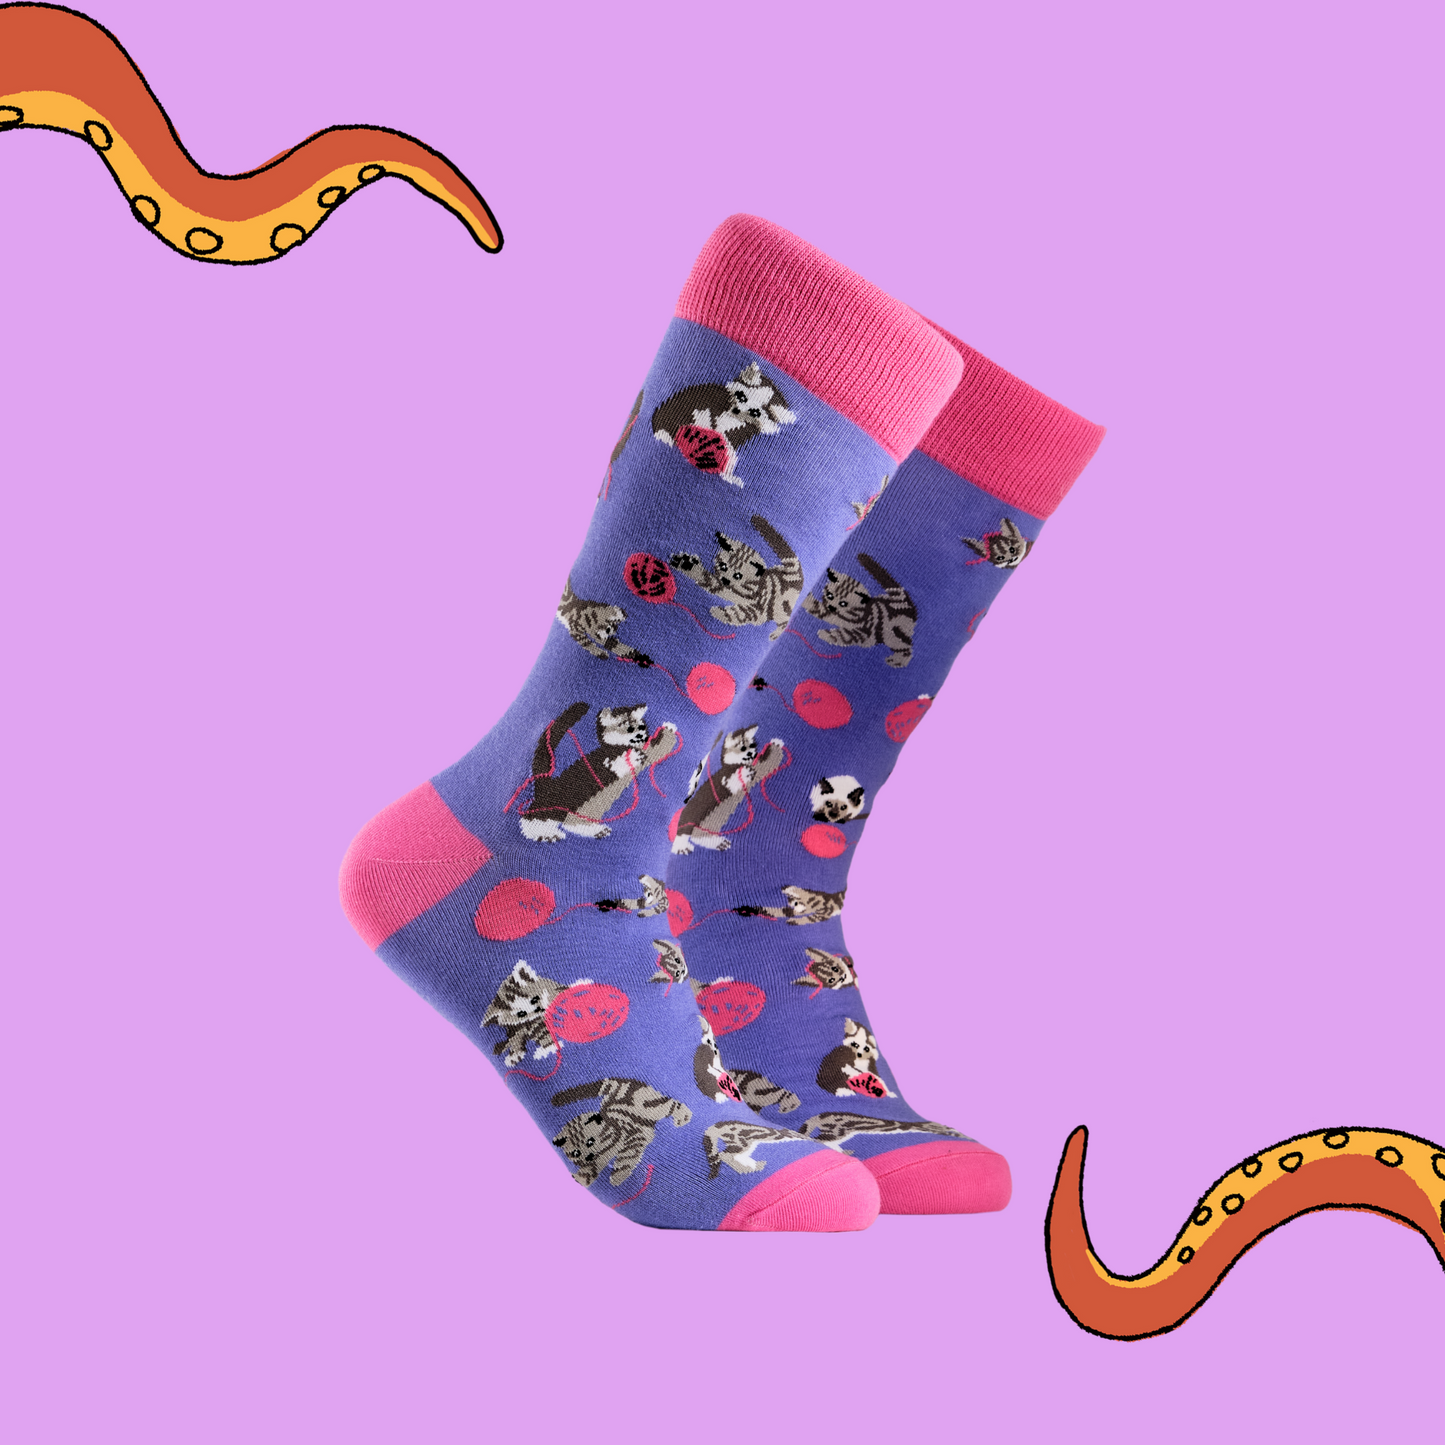 A pair of socks depicting cats playing with wool. Purple legs, pink cuff, heel and toe.